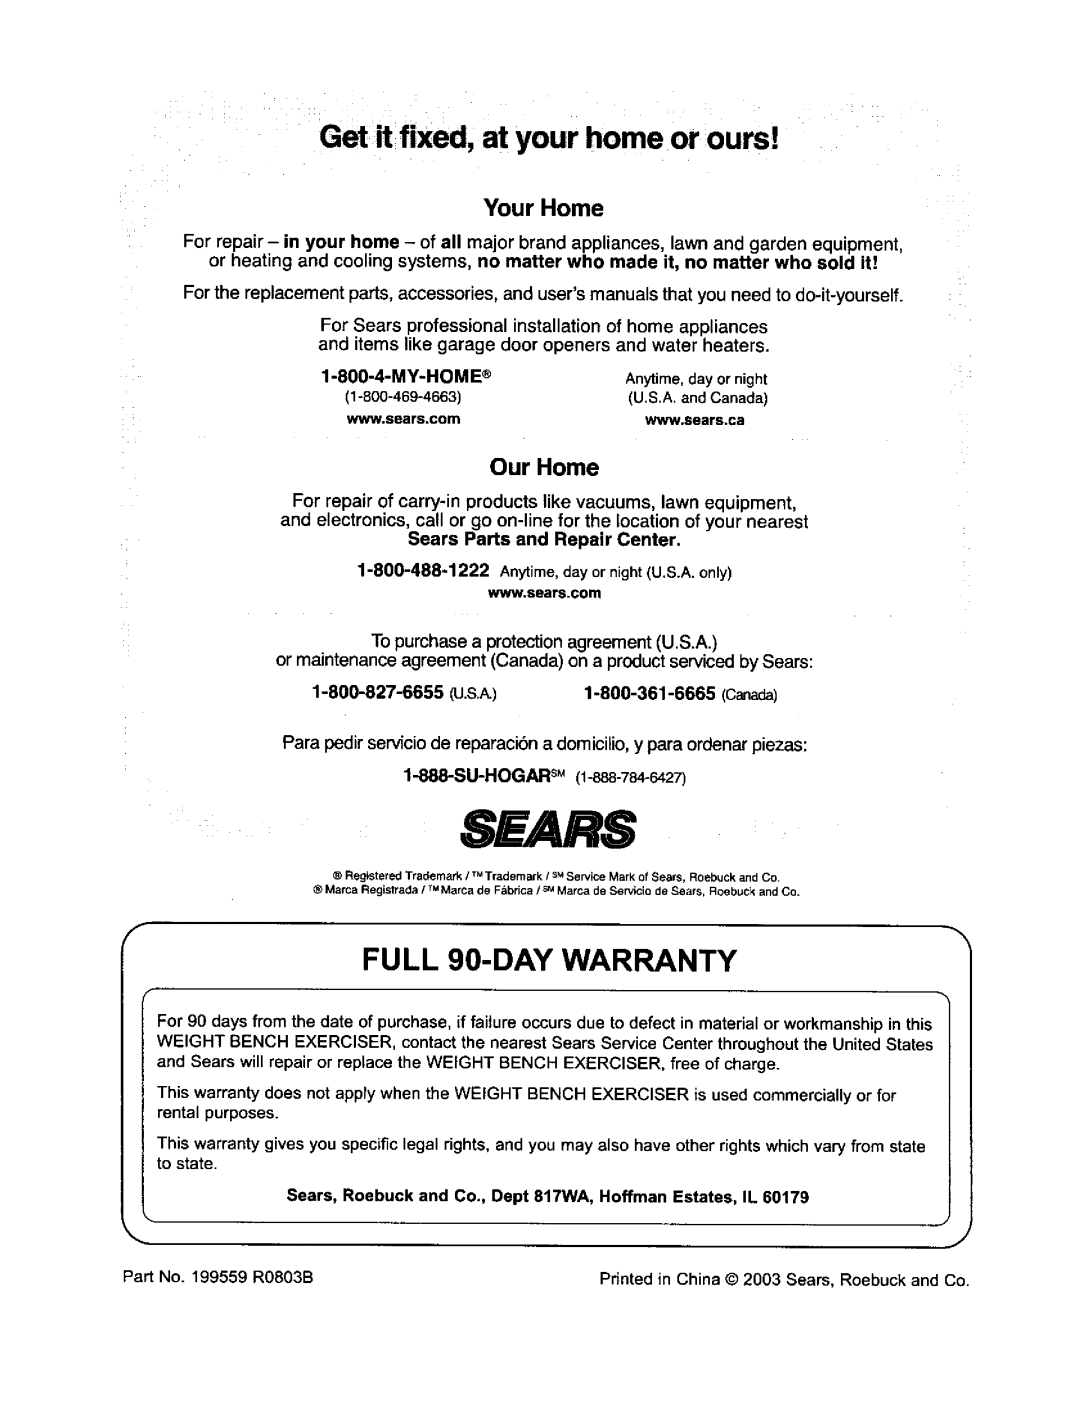 ProForm 831.15032 user manual FULL 90-DAY WARRANTY, Sears, Get it fixed, at your home or ours, Your Home, Our Home 